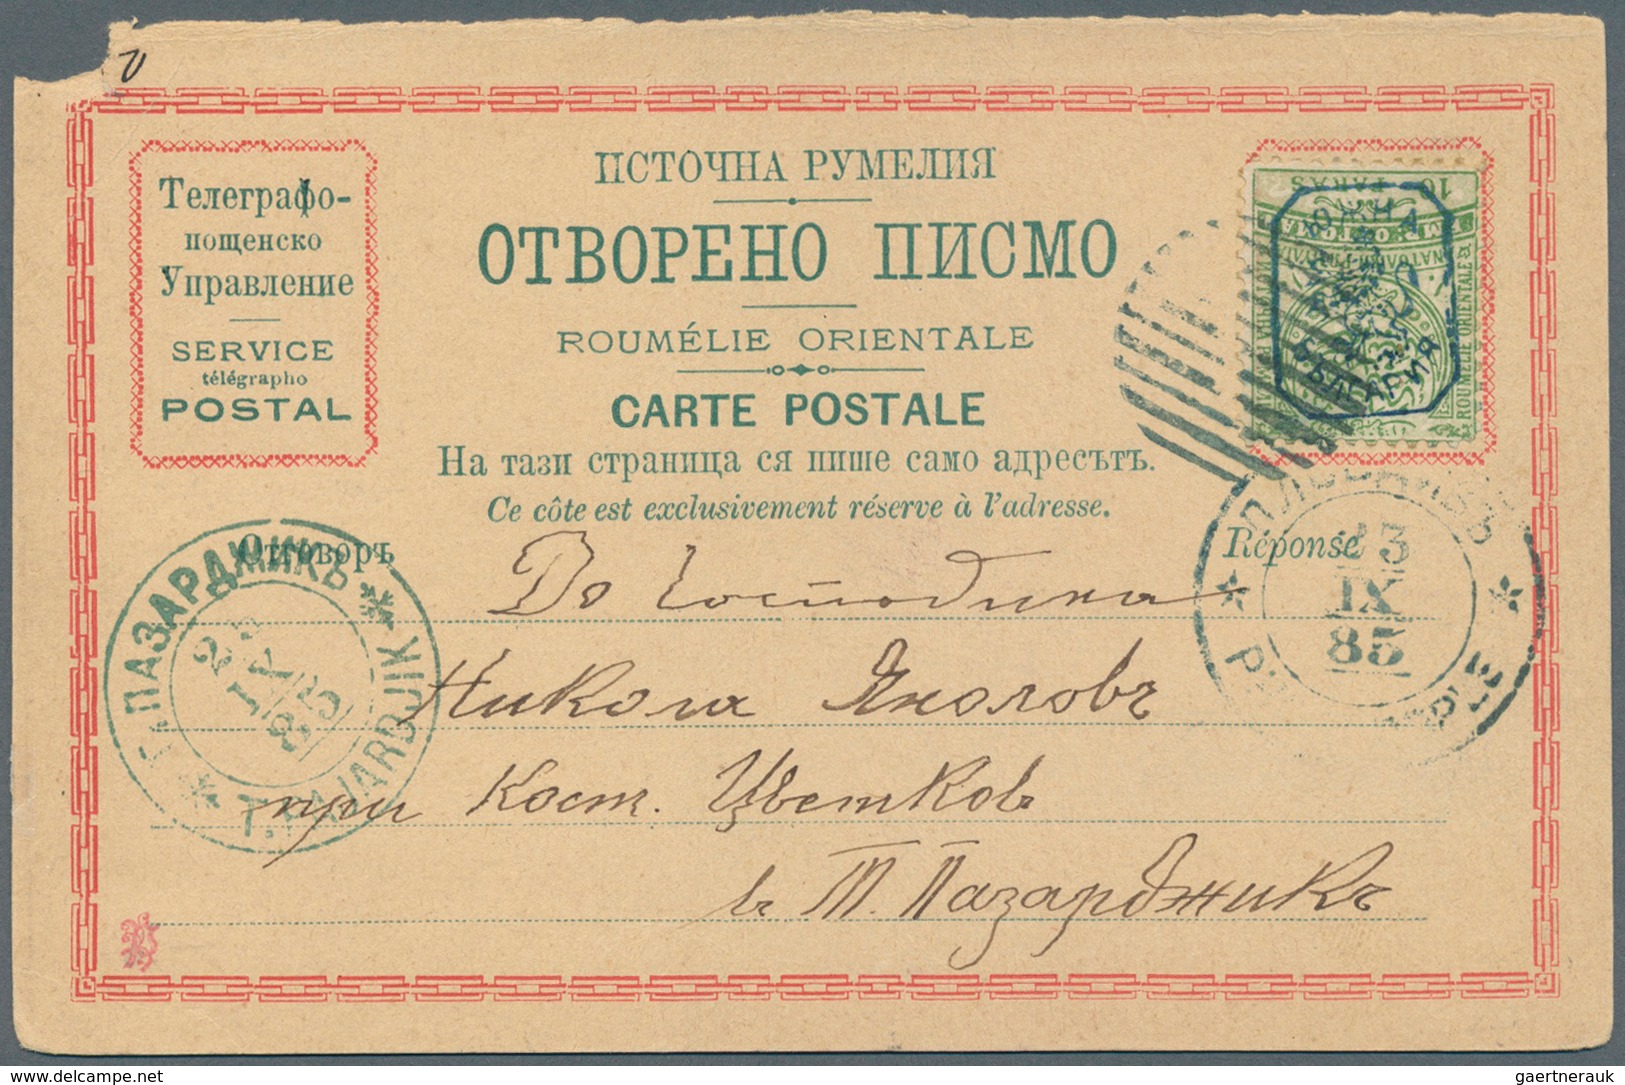 Br/GA/**/O Ostrumelien: 1881-85, "SOUTH BULGARIA & EASTERN ROUMELIA" Collection of mint and used stamps, covers